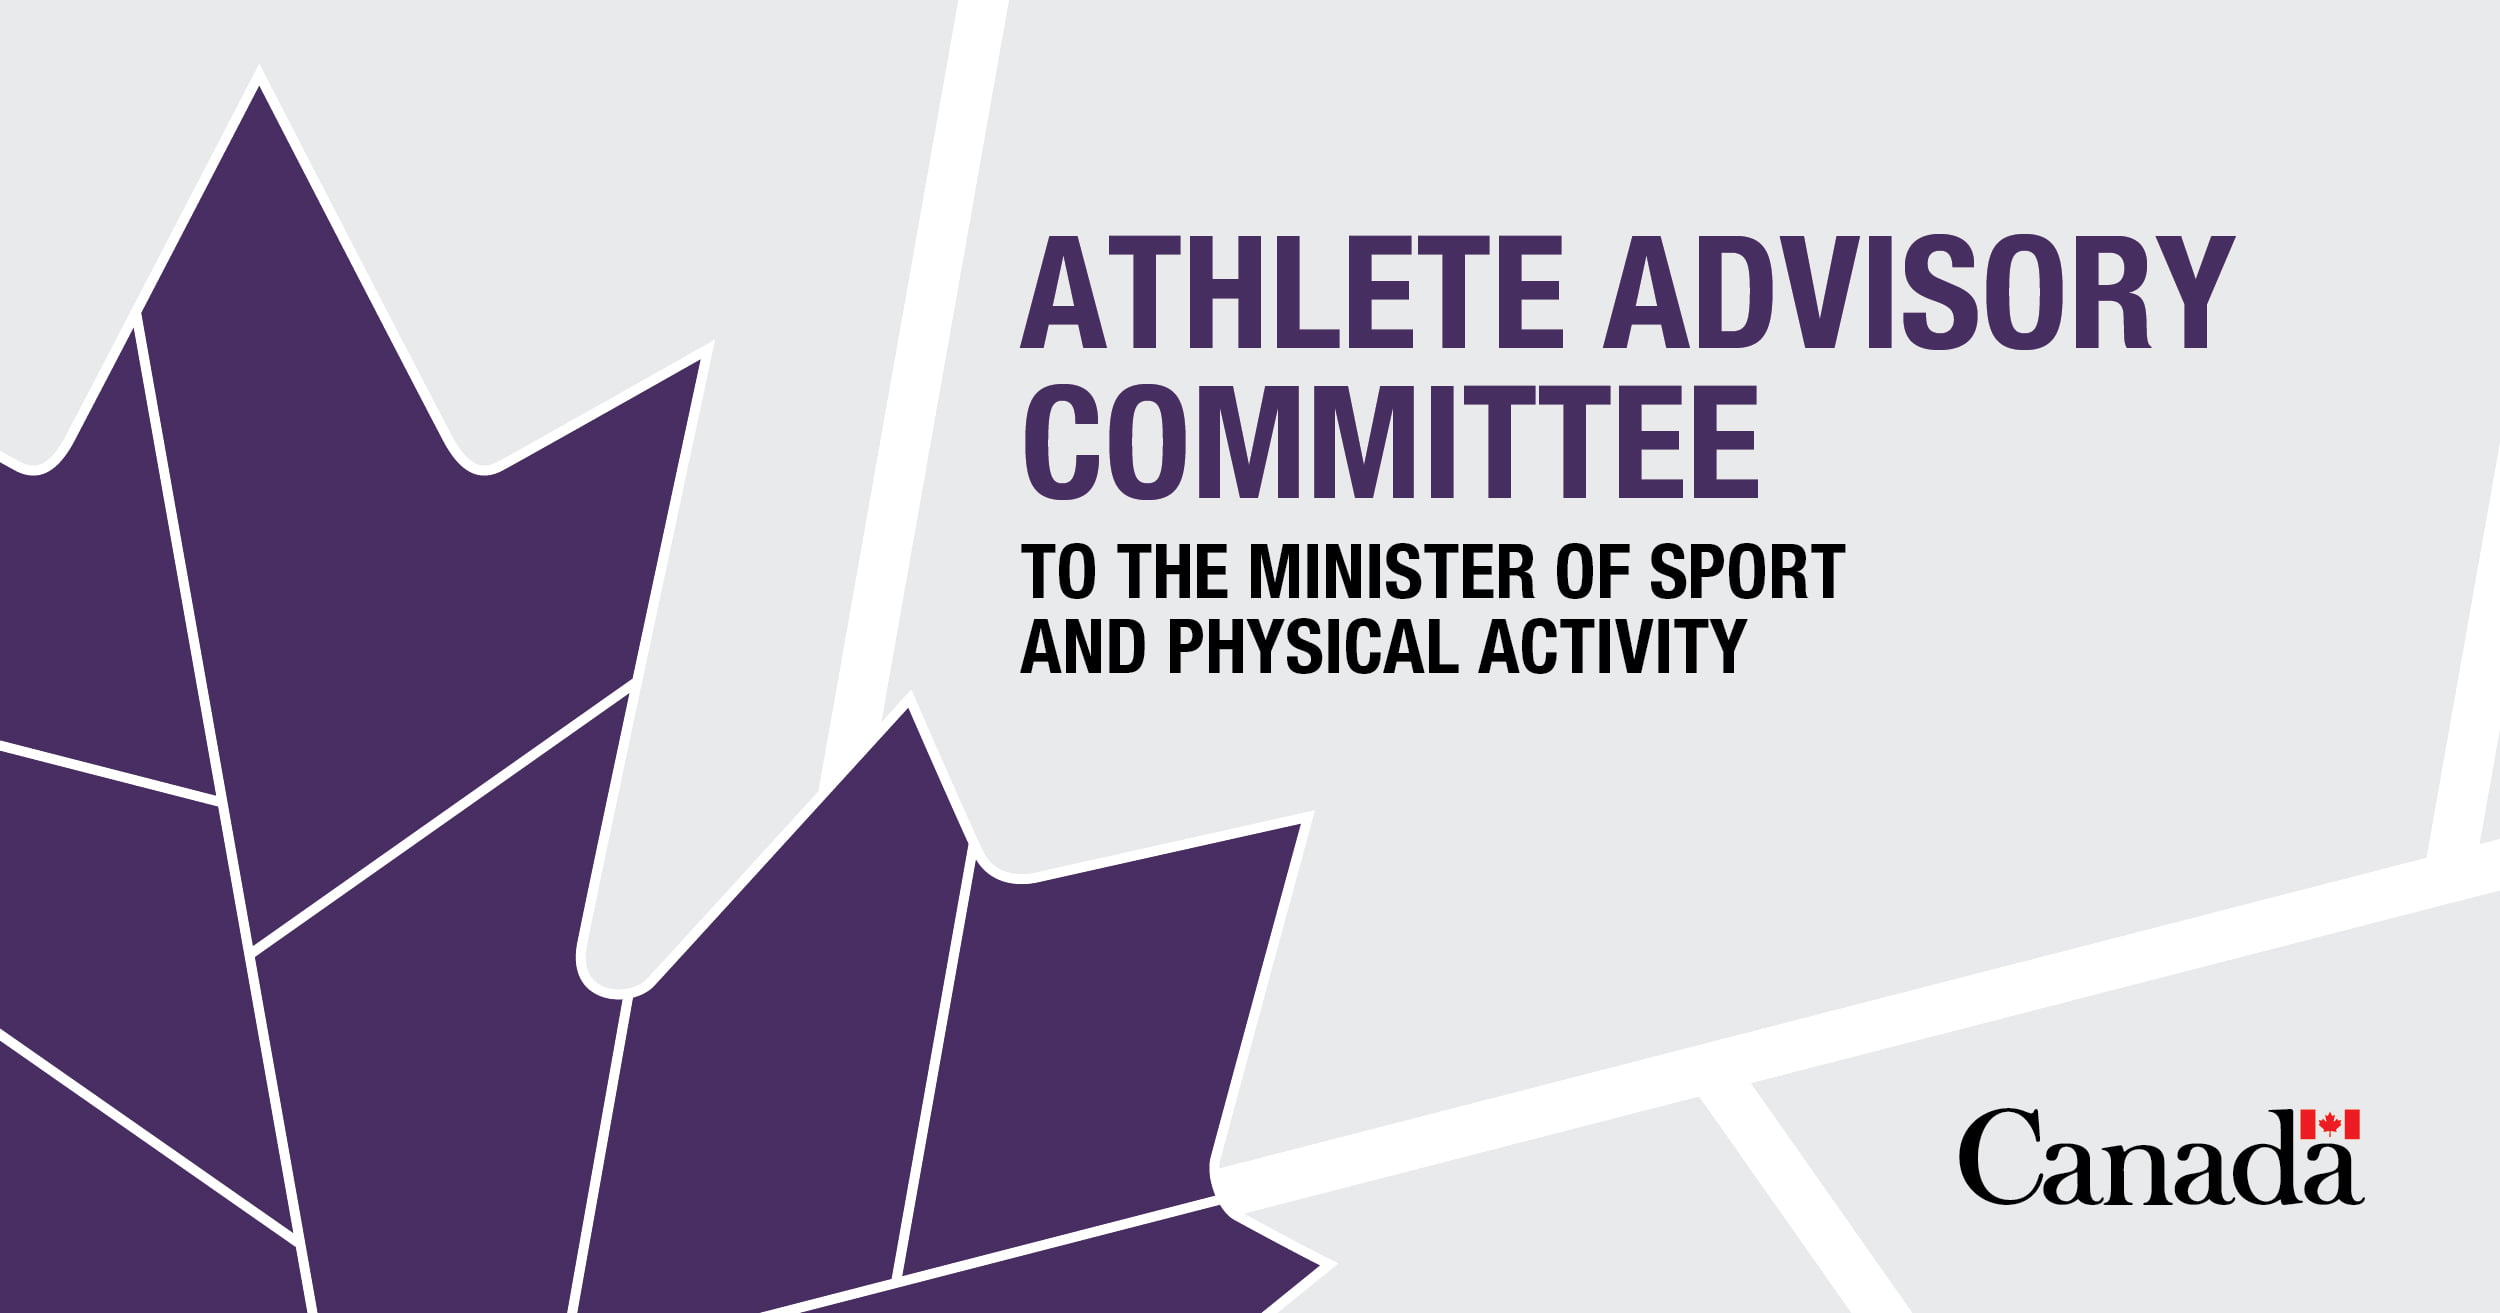 Call for Applications: Athlete Advisory Committee to the Minister of Sport and Physical Activity